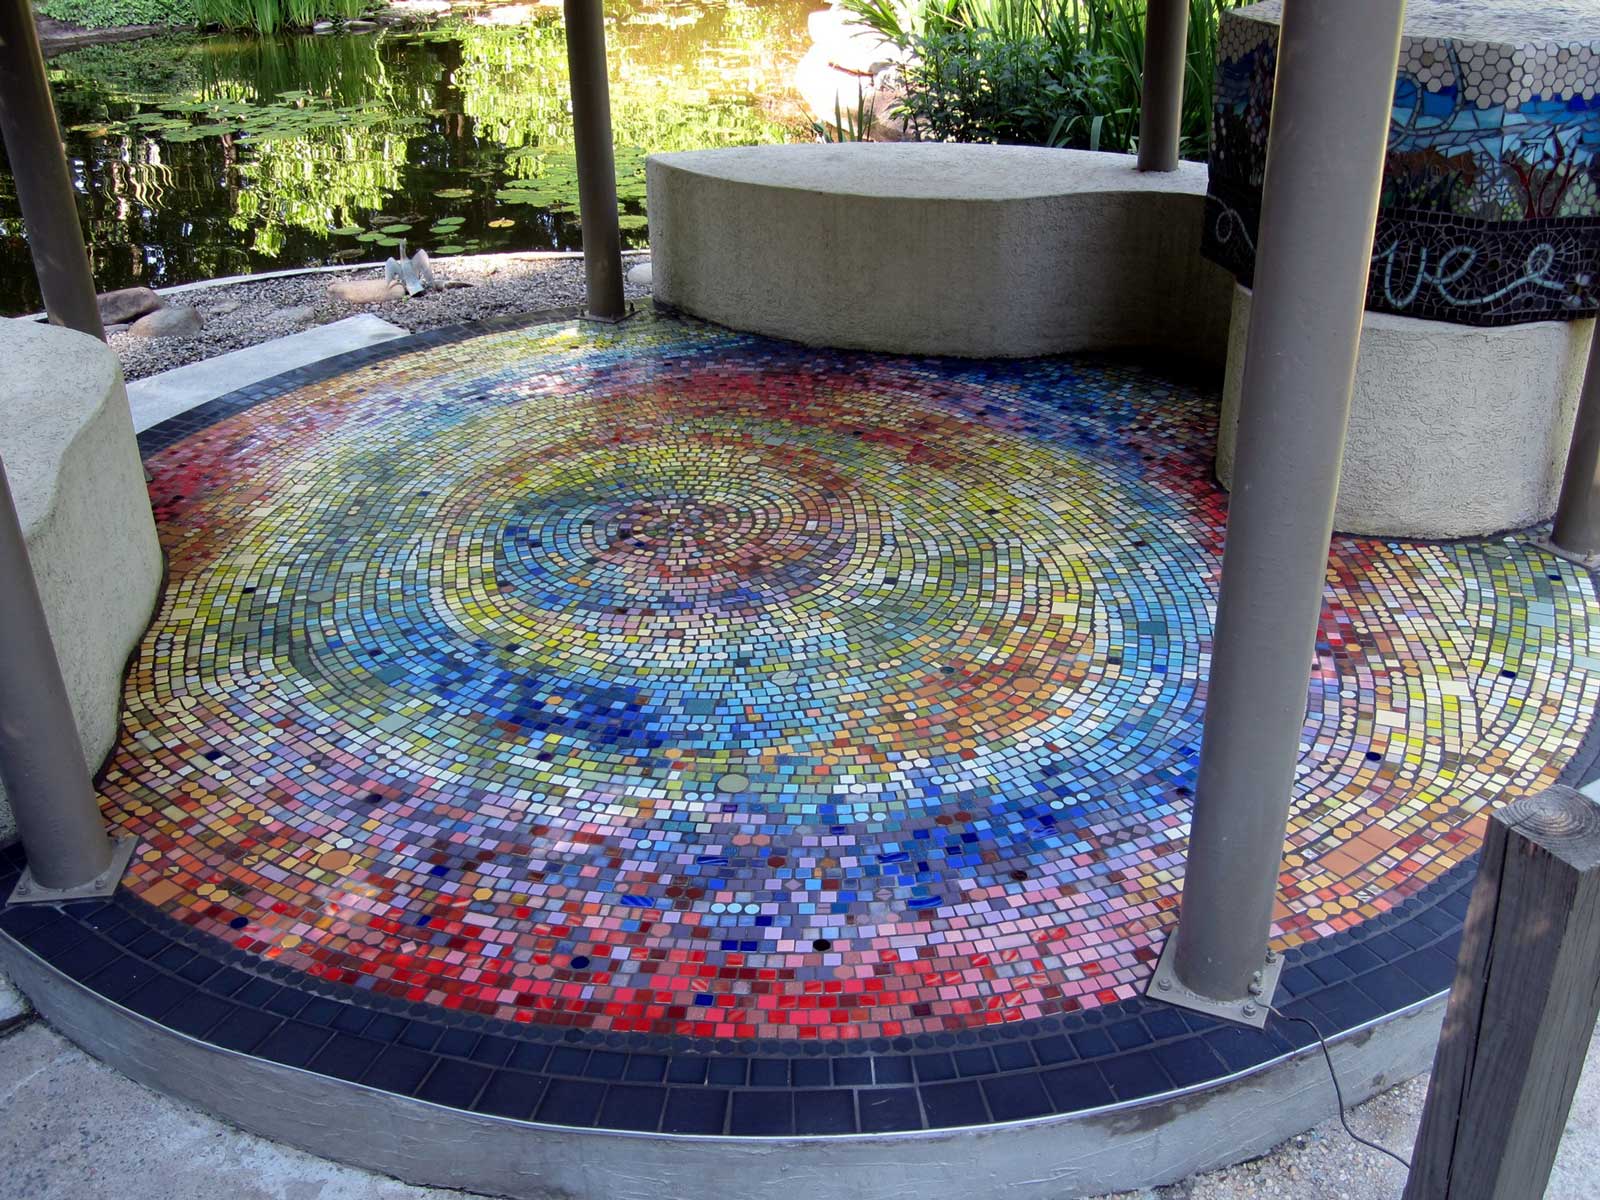 Rakusin Gazebo recycled mosaic tile, private residence, Chapel Hill NC by Jeannette Brossart